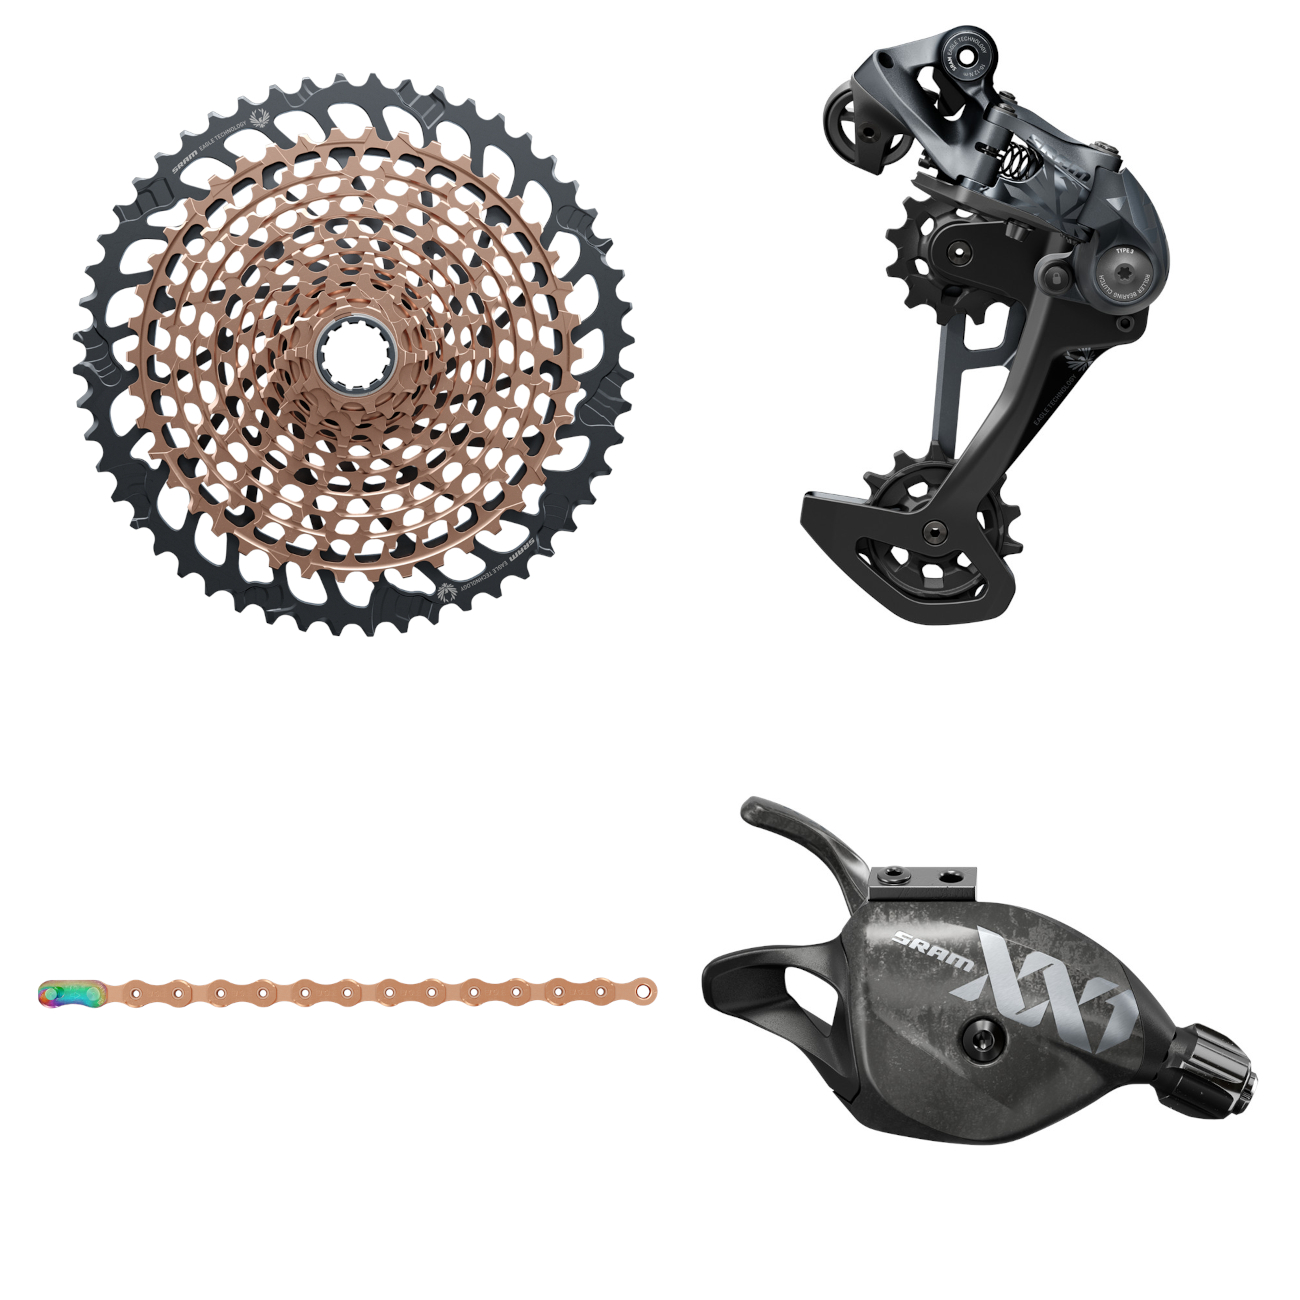 Picture of SRAM XX1 Eagle 1x12-speed Upgrade Kit - Trigger Shifter - 10-52 t. XG-1299 Cassette - Copper